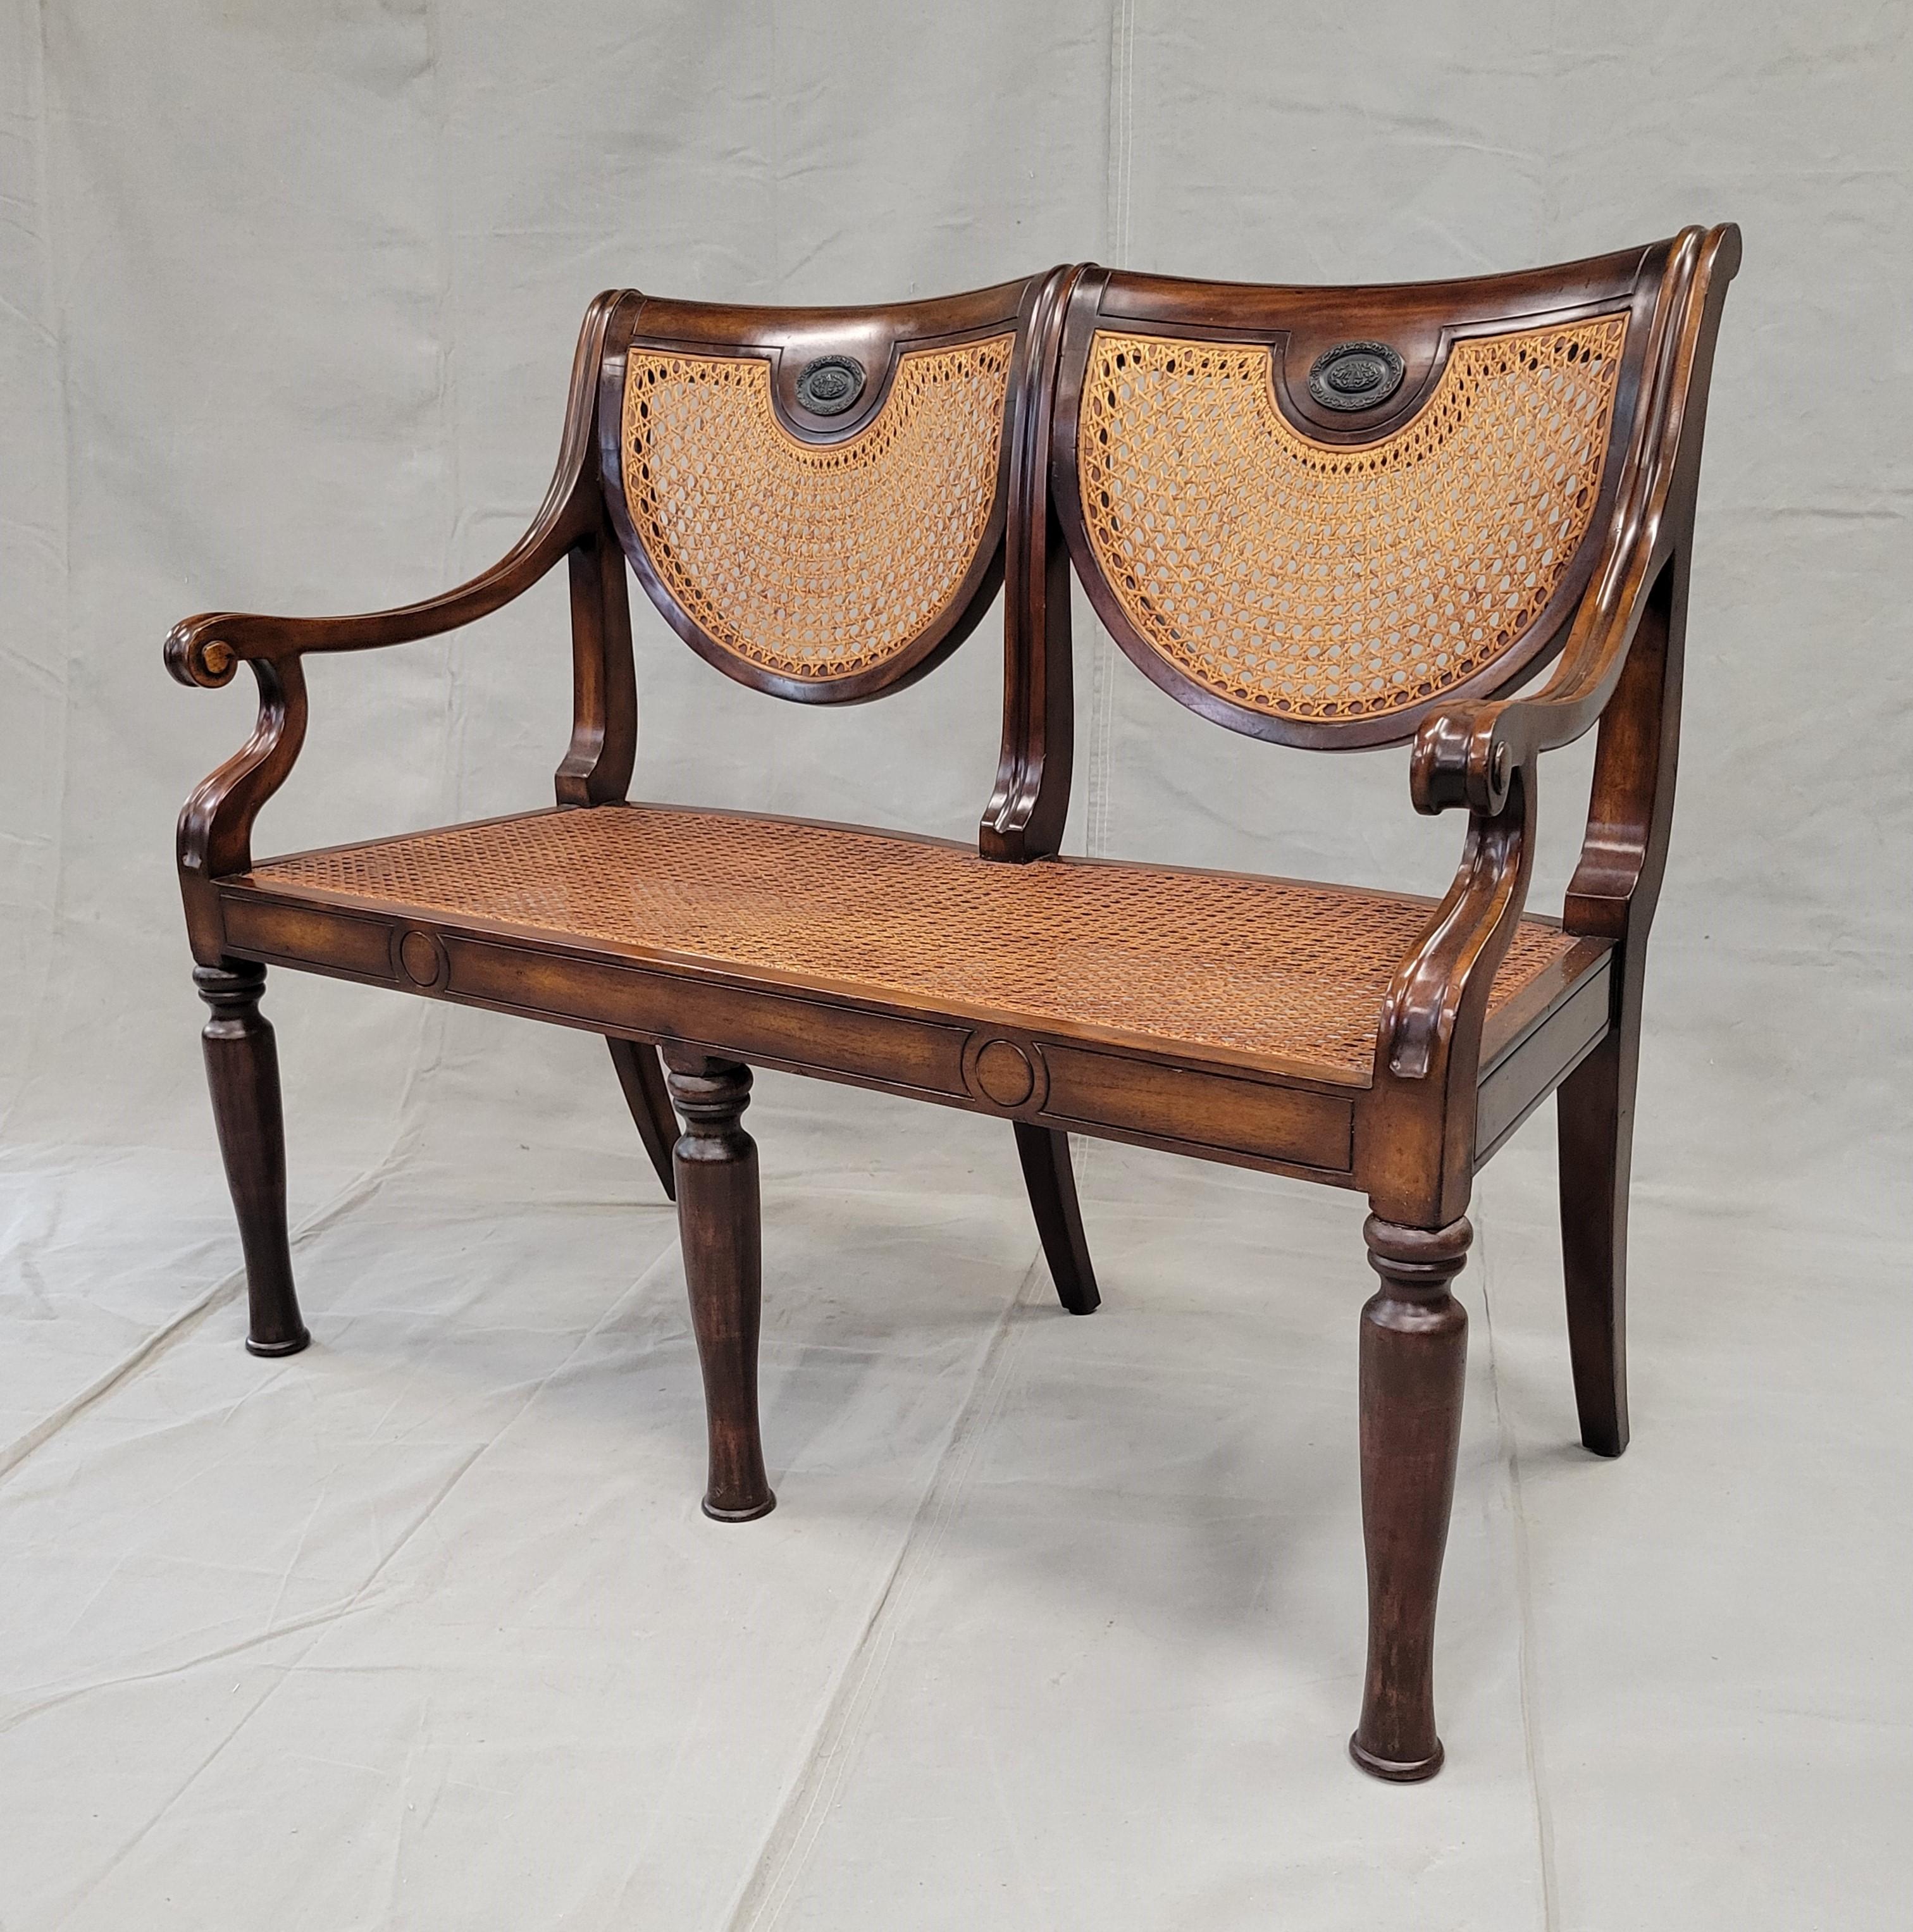 An elegant, Regency style vintage Theodore Alexander caned settee bench with luxurious champagne velveteen and silk down seat cushion. Bench can be used with or without the cushion. Strong and sturdy, ready for many years of use. Theodore Alexander